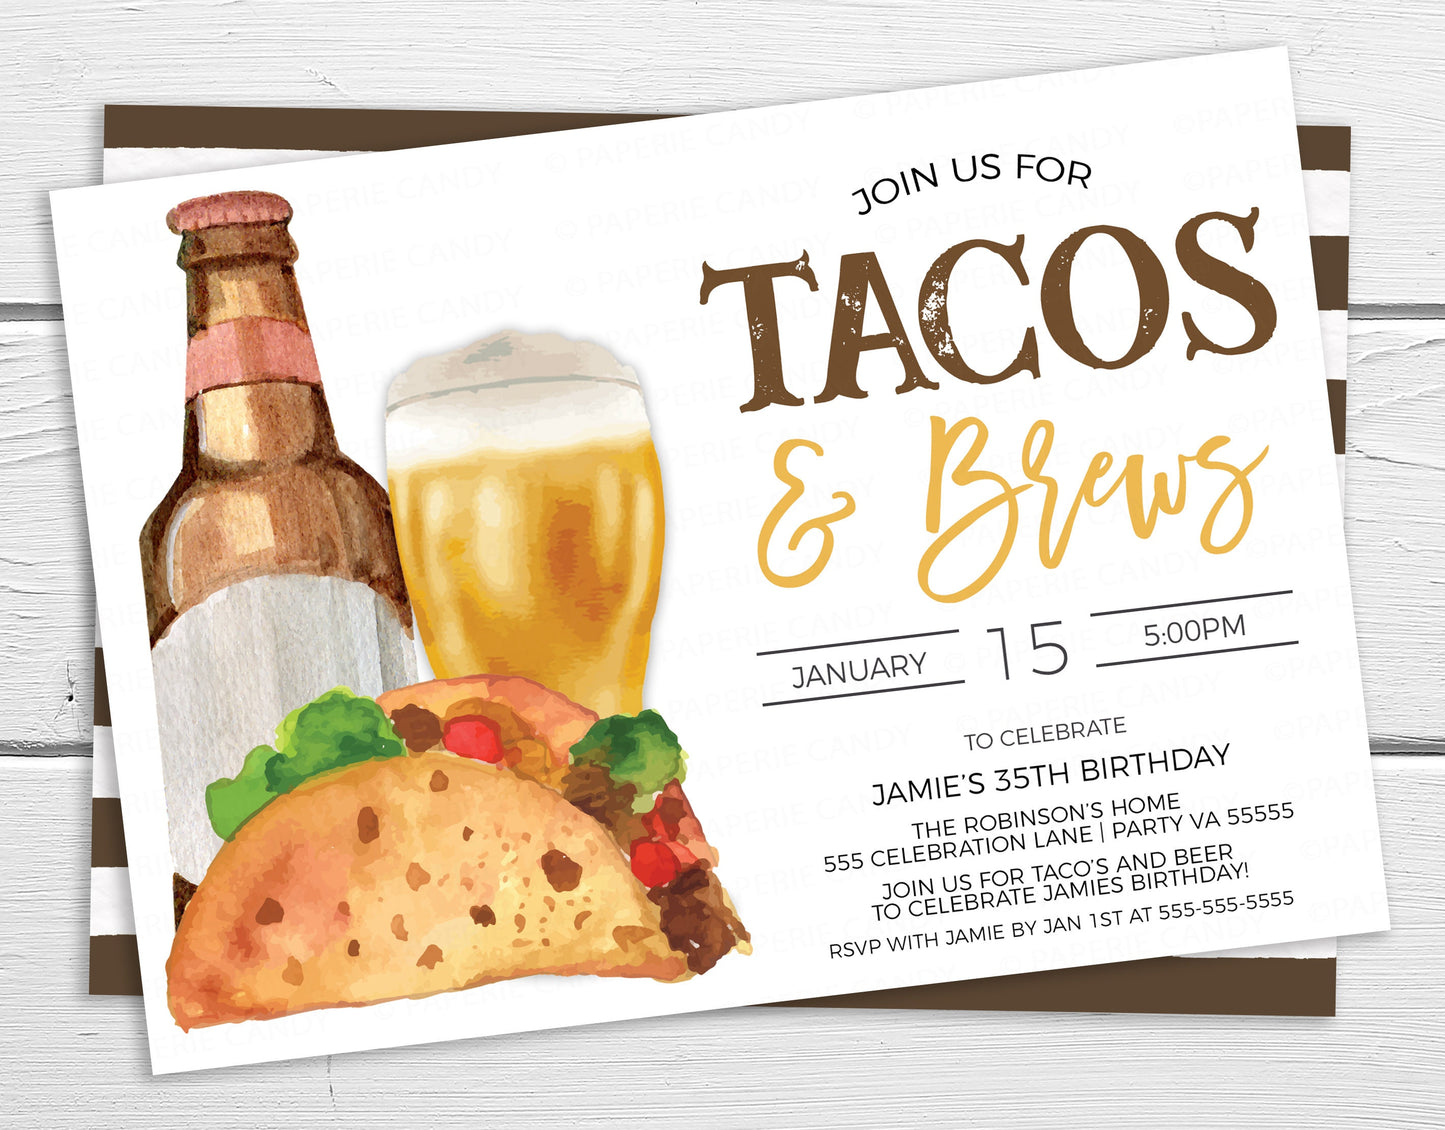 Tacos And Beer Invitation, Taco Bar Party Invite, Surprise Taco & Brews Birthday Party, Retirement Party Digital Editable Printable Template